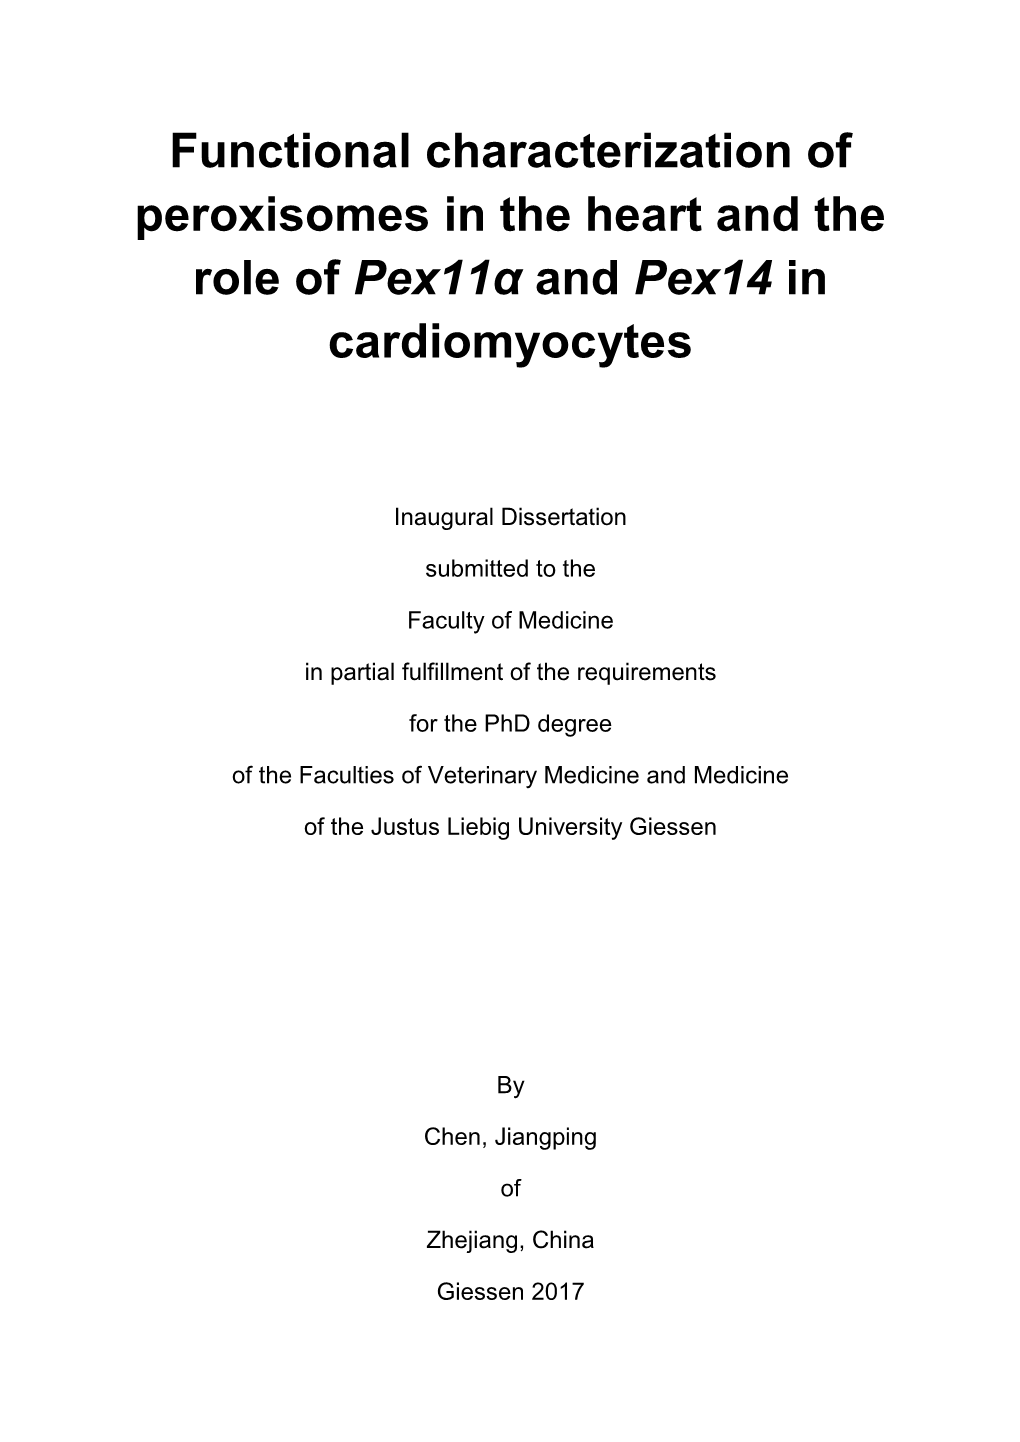 Functional Characterization of Peroxisomes in the Heart and the Role of Pex11α and Pex14 in Cardiomyocytes